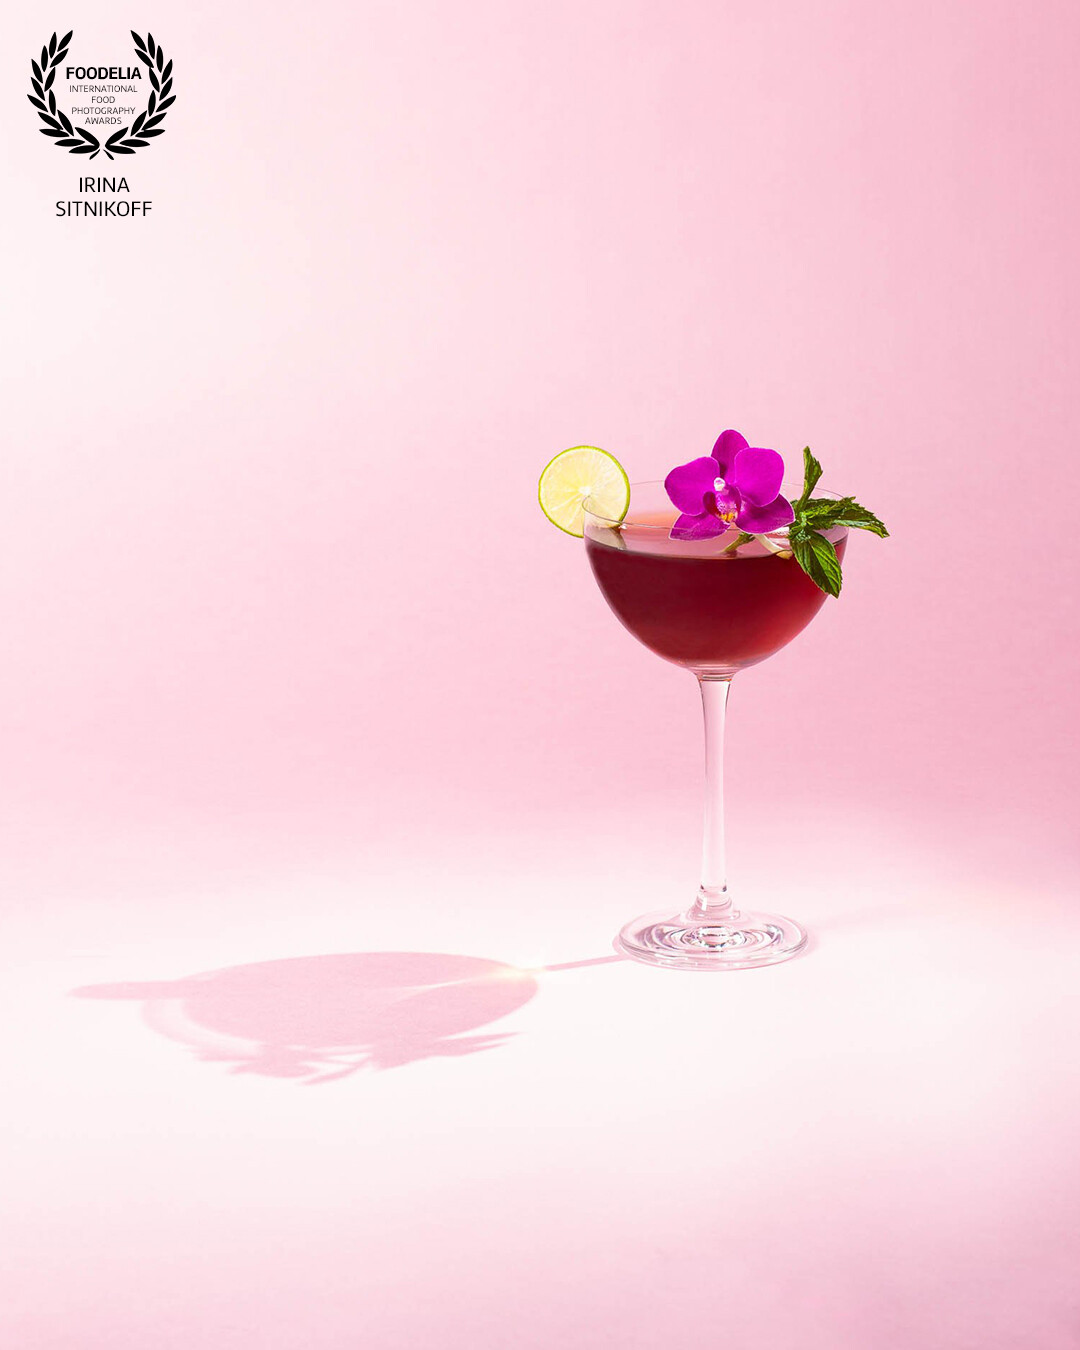 This photo was inspired by my wonderful food photography teacher & mentor Nelly Le Comte from Le Cordon Bleu. The combination of burgundy red refreshing cocktail color with fuschia colored orchid flower, piece of lime on a pink background represents love, romance and sweet emotions as well as butterflies in the stomach.